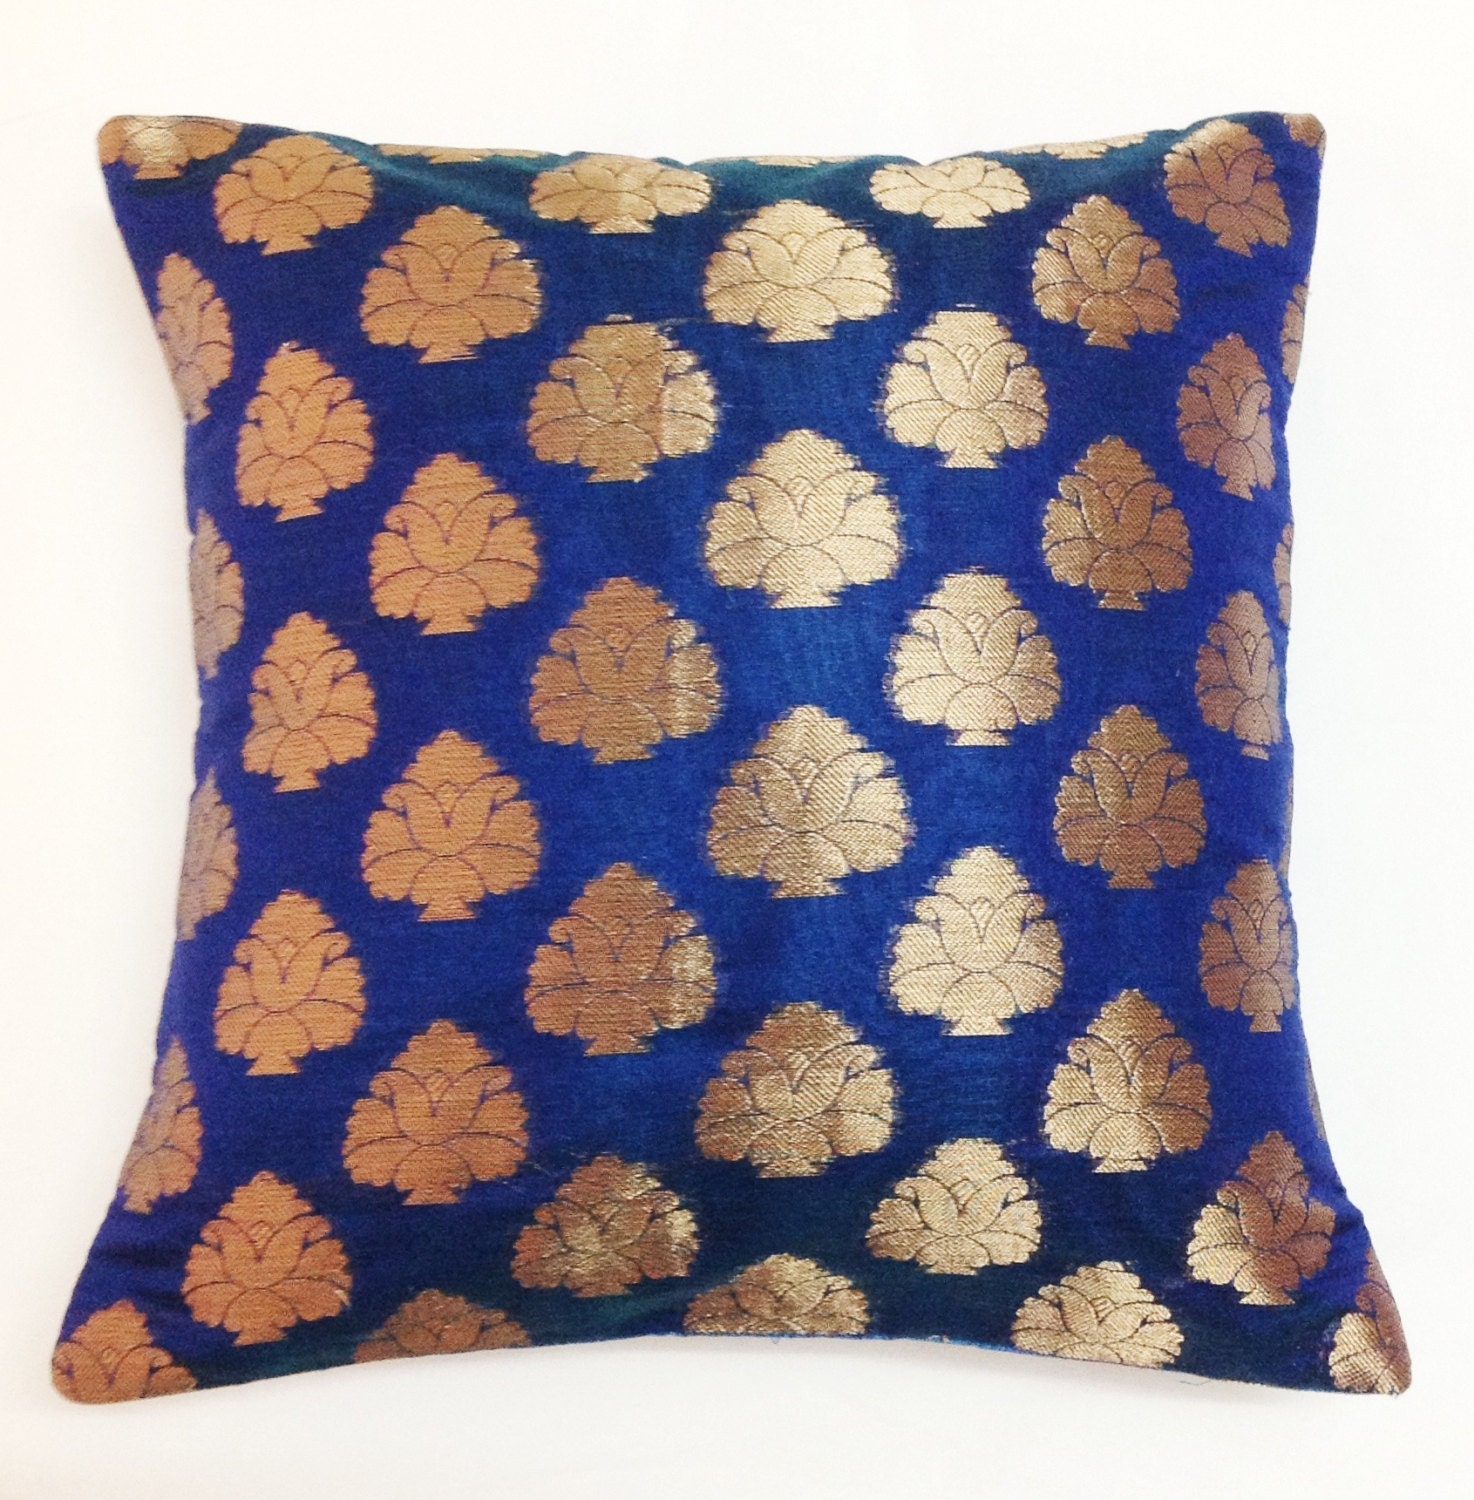 Electric Blue and Gold Decorative Silk Pillow Cover - Handmade Throw Pillow - Silk Cushion Cover  12x12 inches - DesiPillows